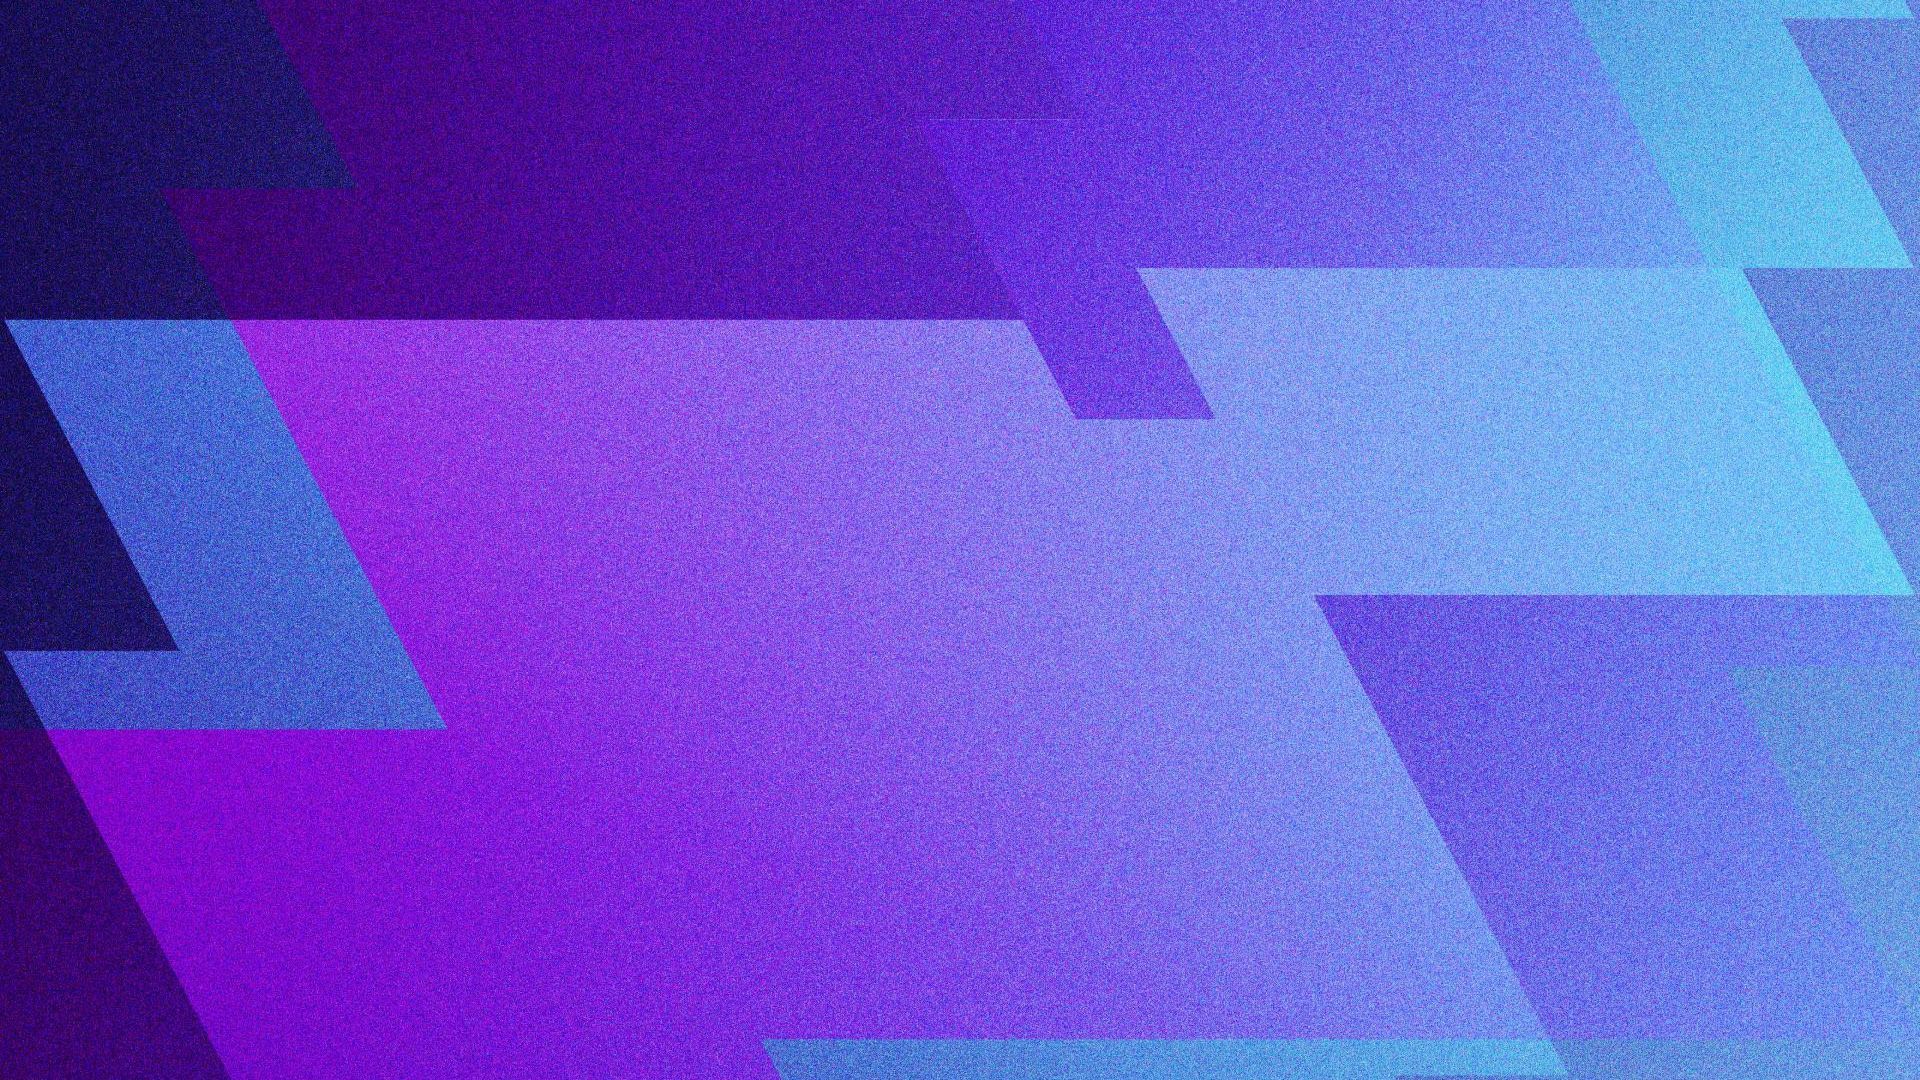 Many geometric rhombi in various shades of blue, purple, and indigo overlaid on one another